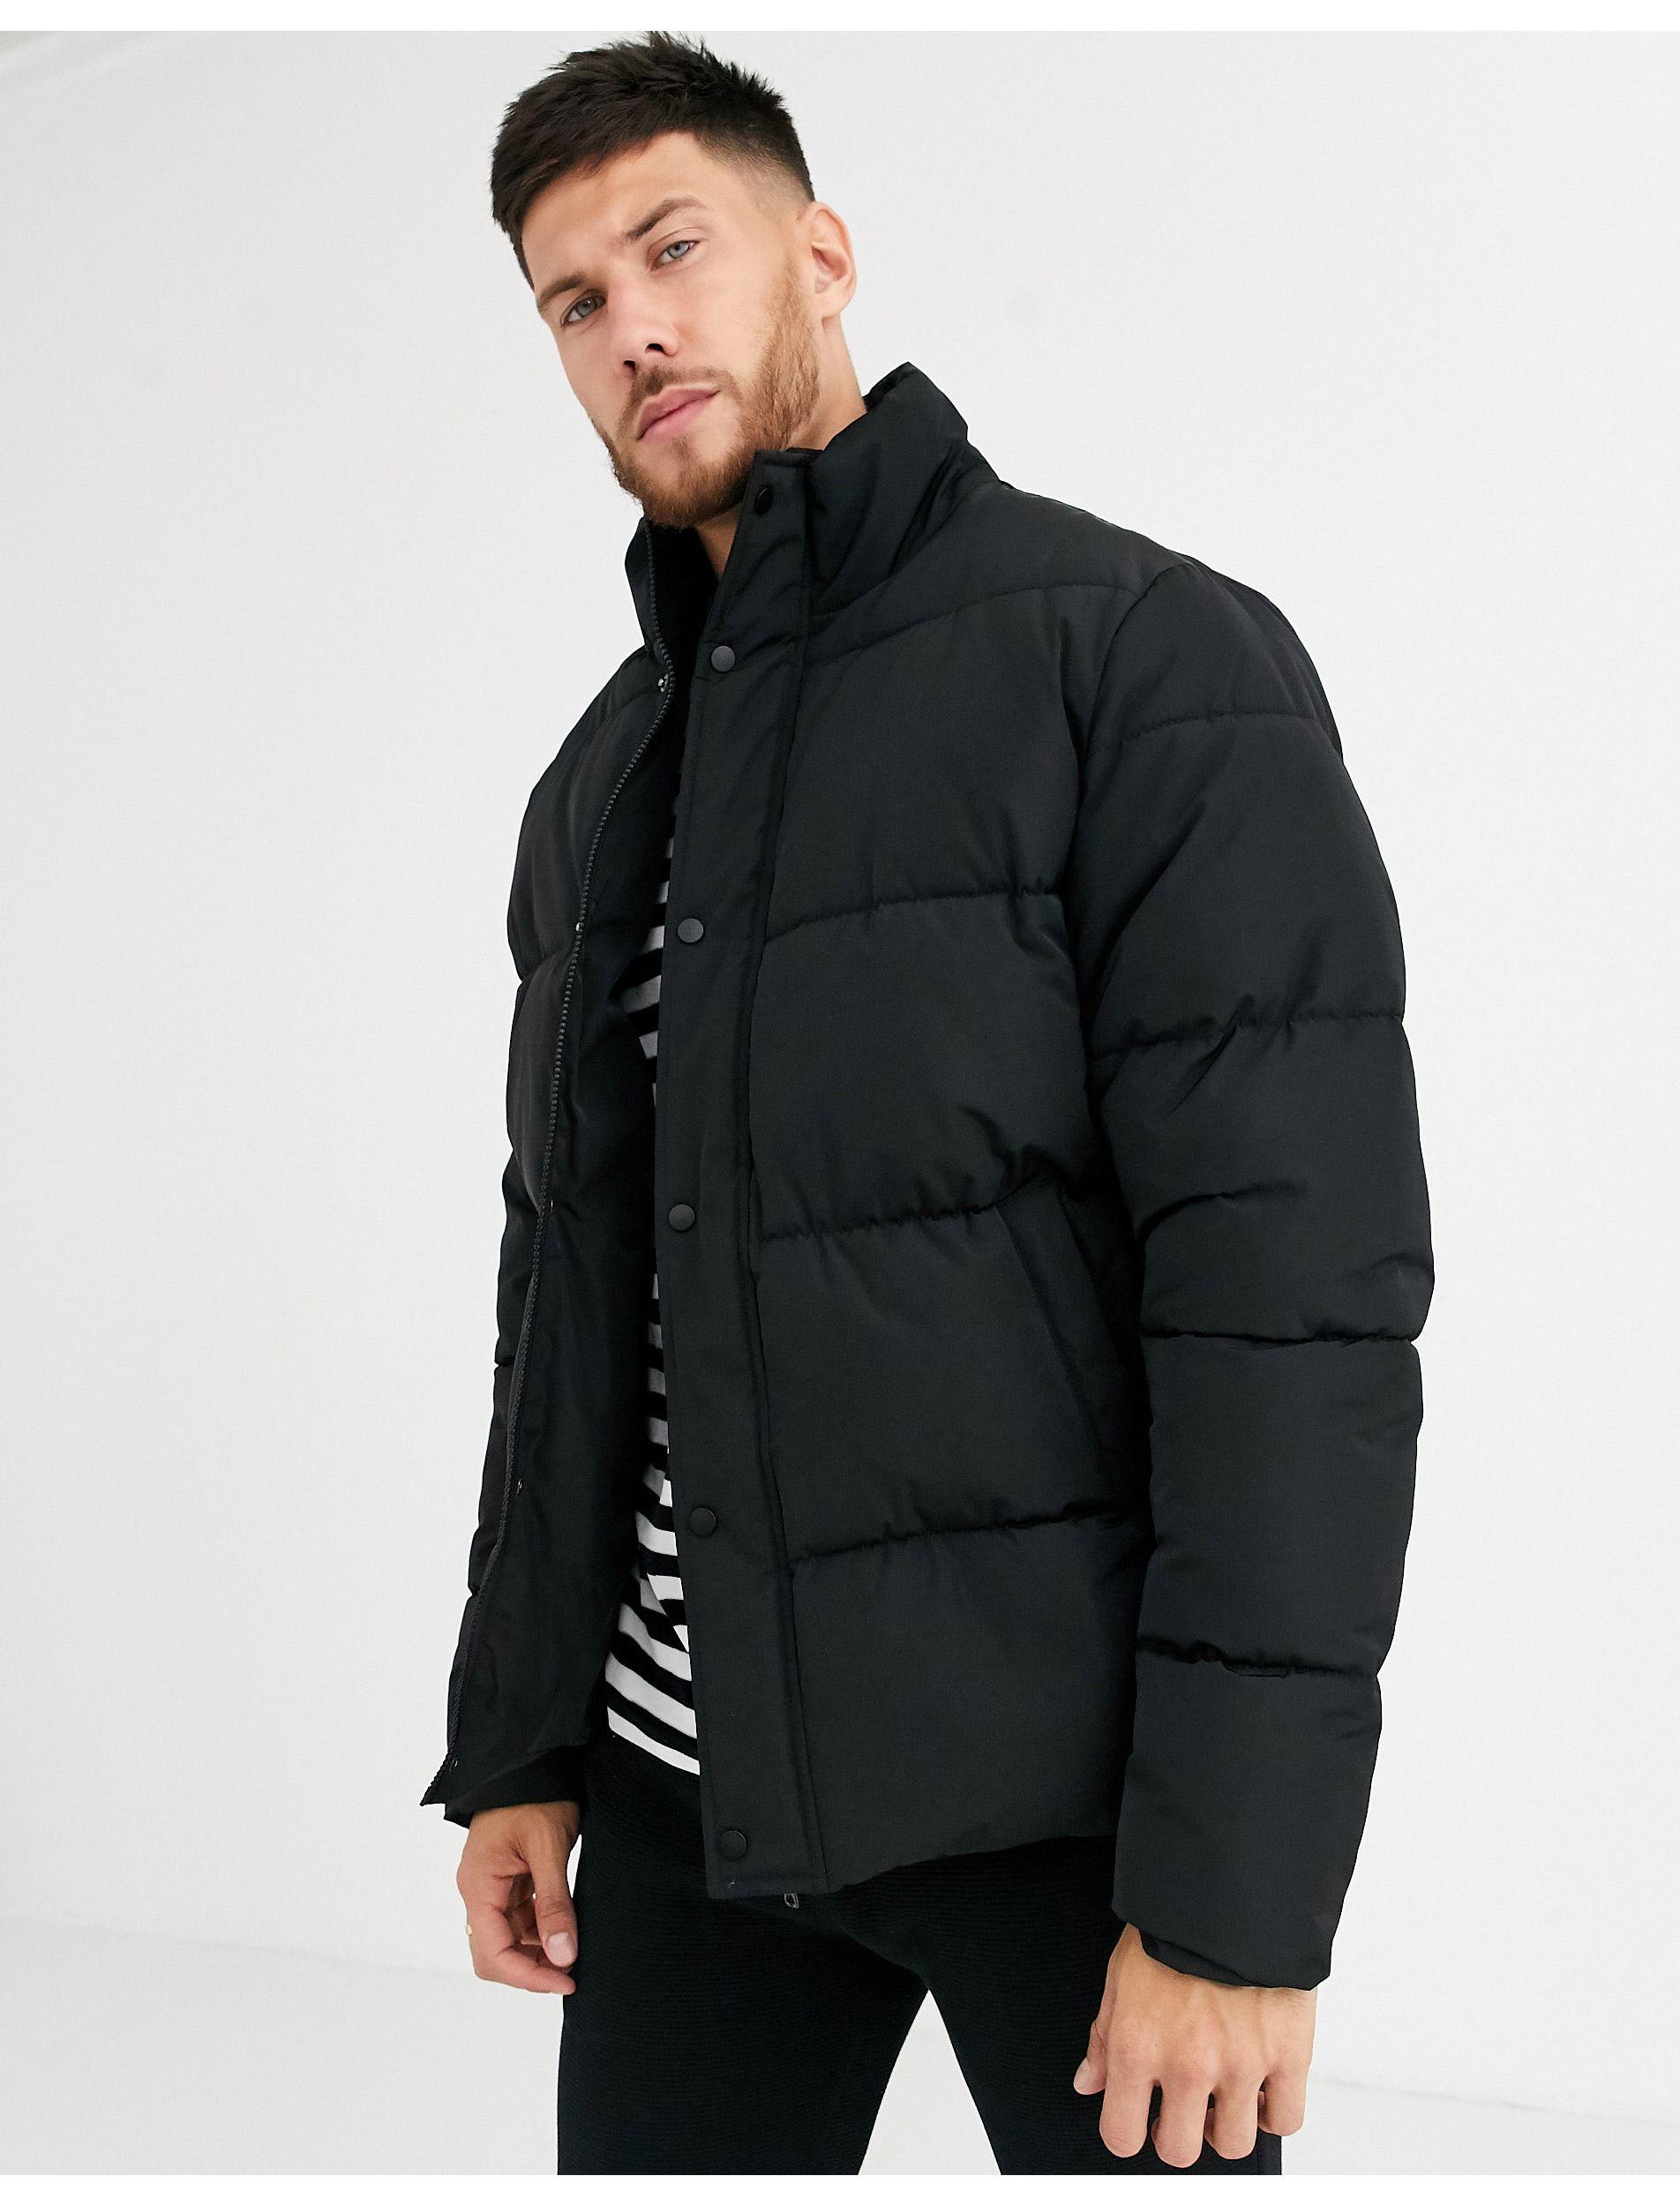 ASOS Synthetic Sustainable Puffer Jacket in Black for Men - Lyst